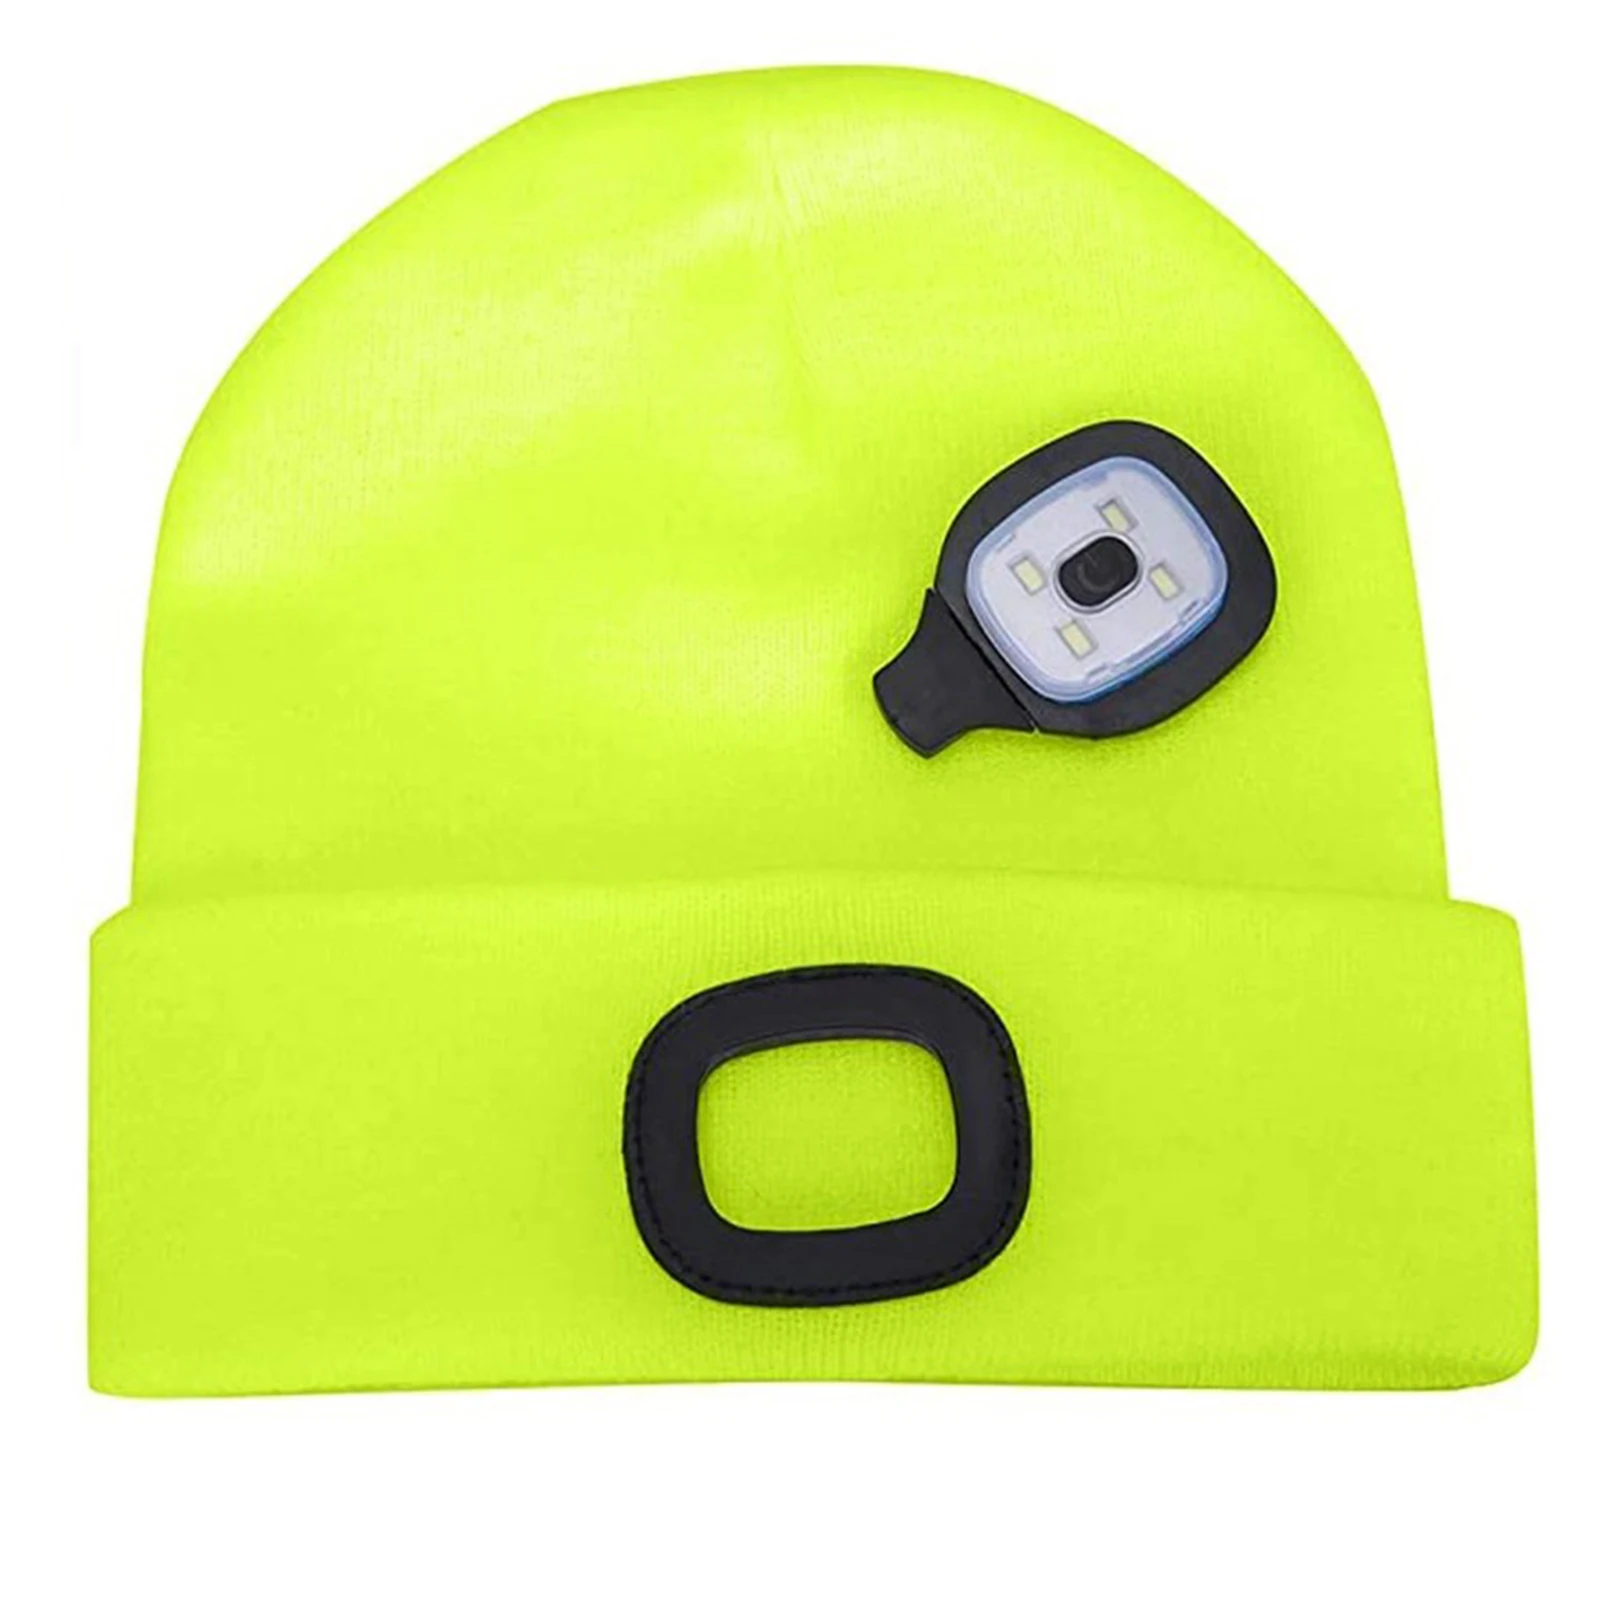 fisherman skully Mens Women Beanie Hat LED Light USB Rechargeable Battery Knitted Warm Hat Walking Night Running Mountain Climbing Hat 2022 New yellow skully hat